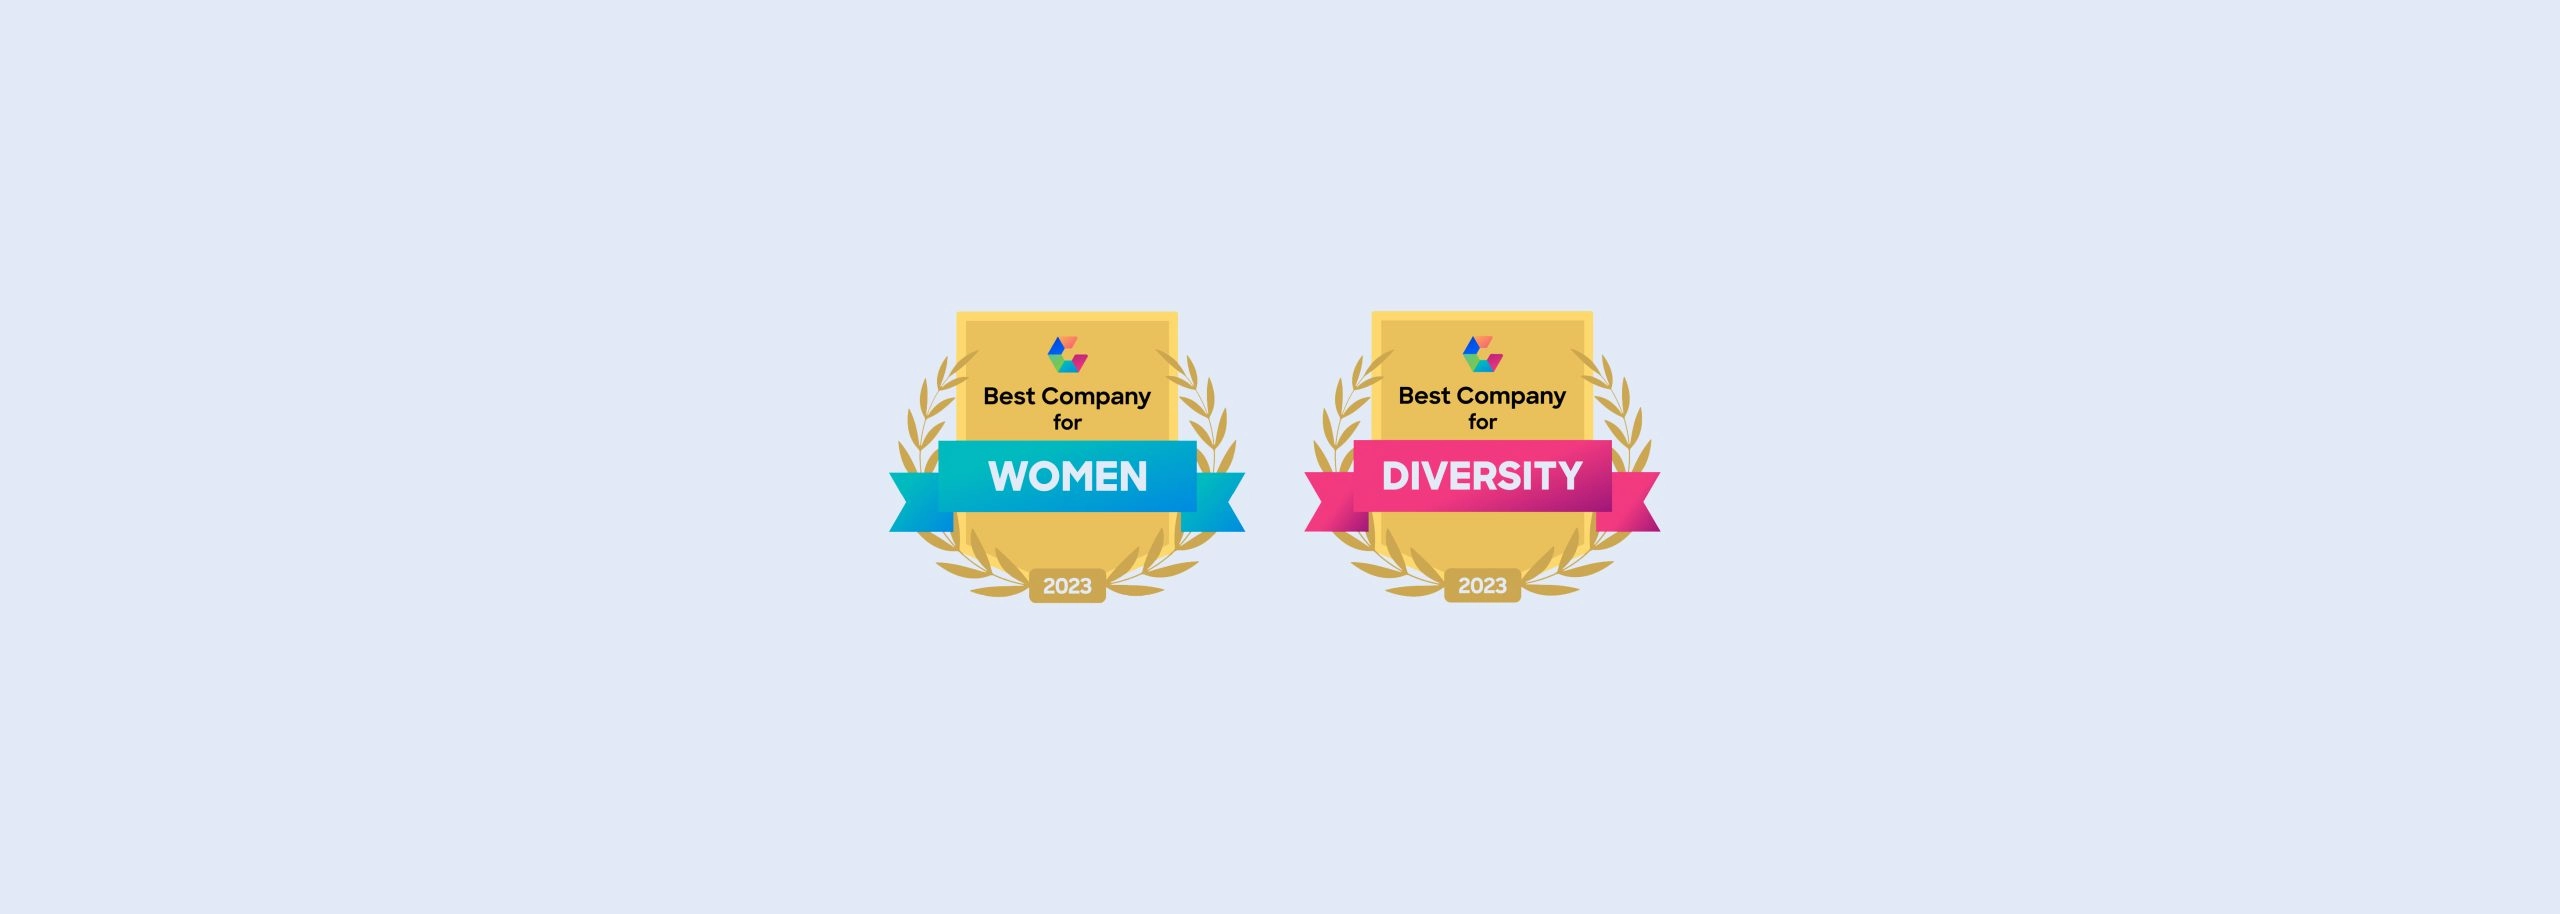 Startek® honored with Comparably awards for Best Company for Women and Best Company for Diversity 